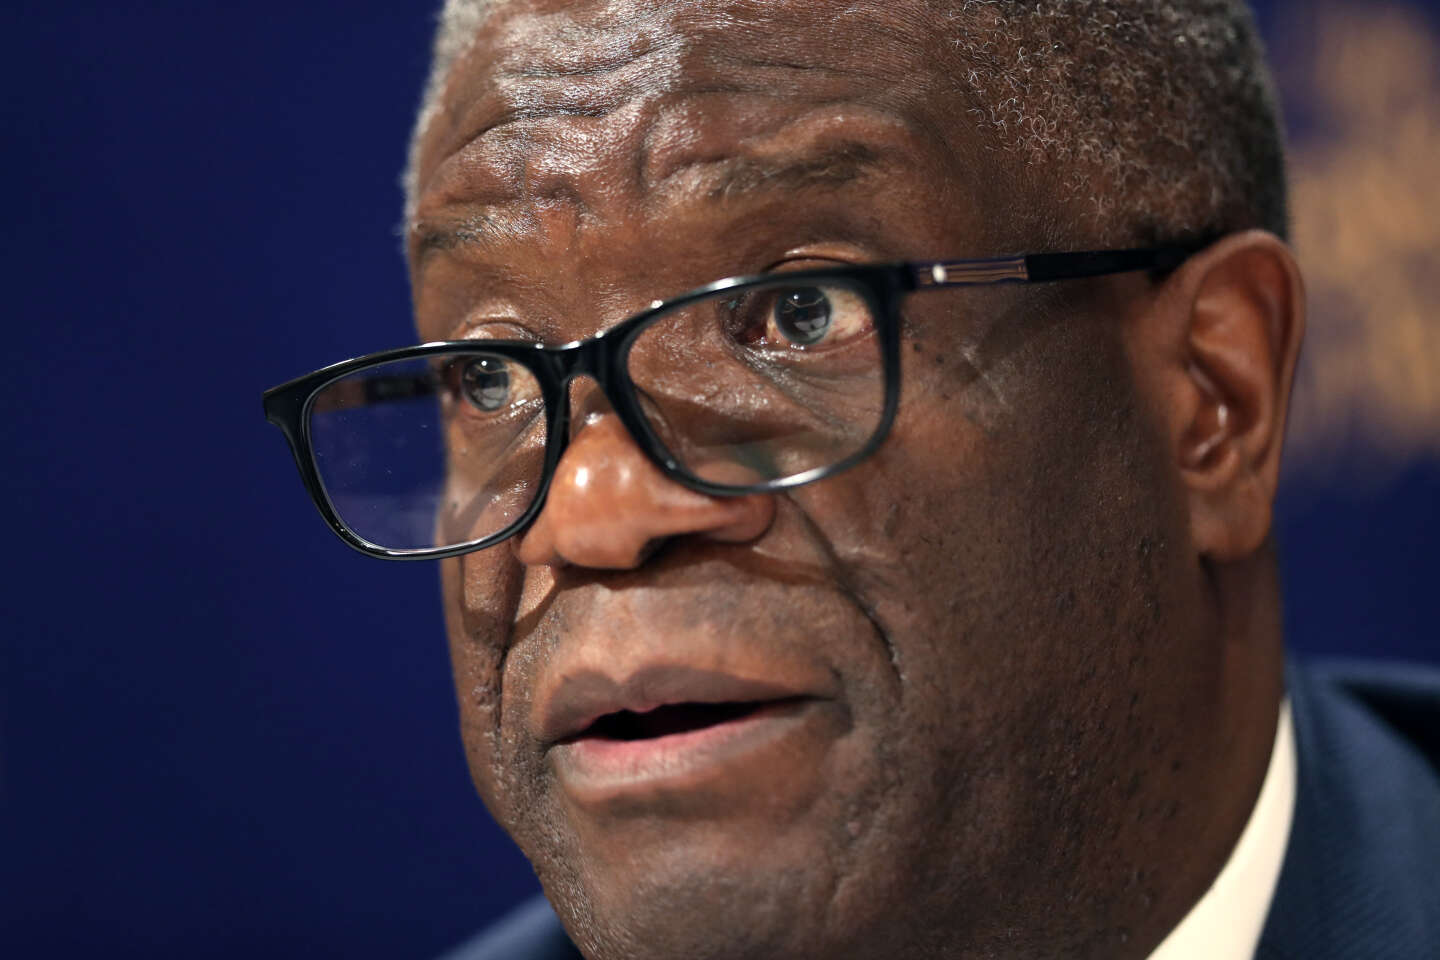 Doctor Denis Mukwege announces his candidacy for the presidential election